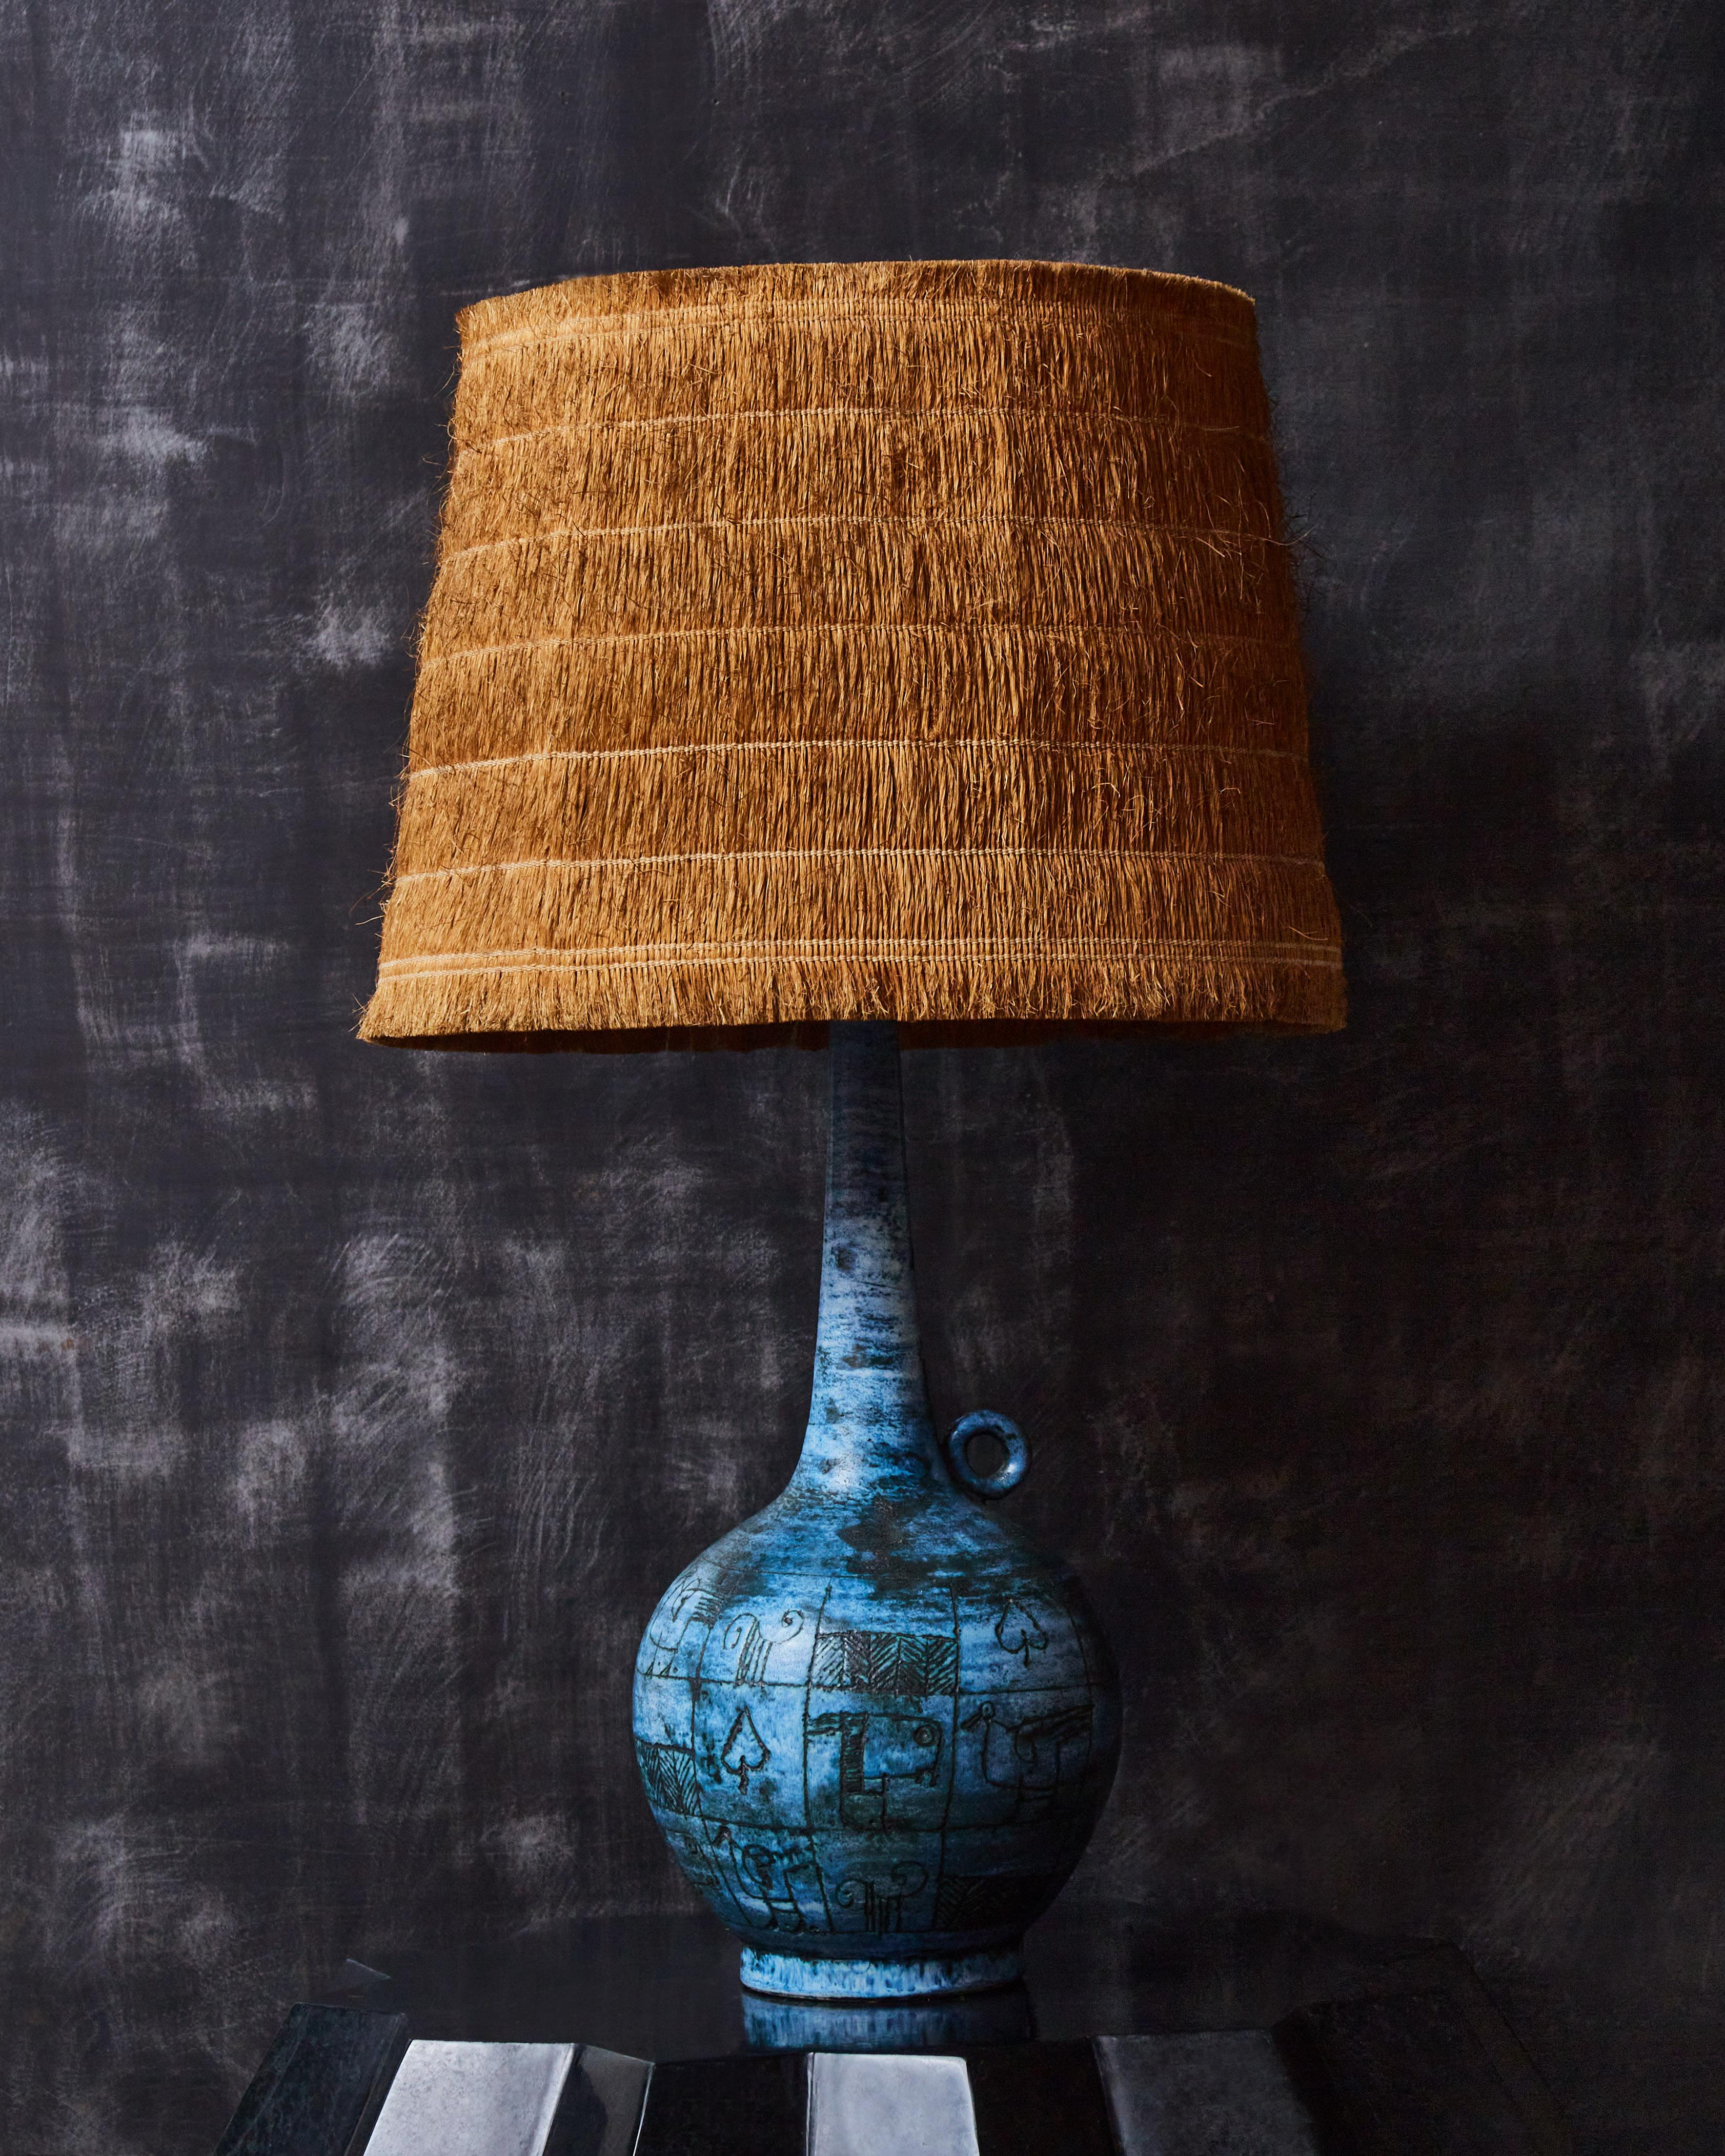 Beautiful jug shaped table lamp in blue glazed ceramic signed by Jacques Blin with Zoomorphic decors. Original lampshade made of coconut fibers. Signed under the base.

Jacques Blin (1920-1995)
Jacques Blin is a well-known French ceramist who